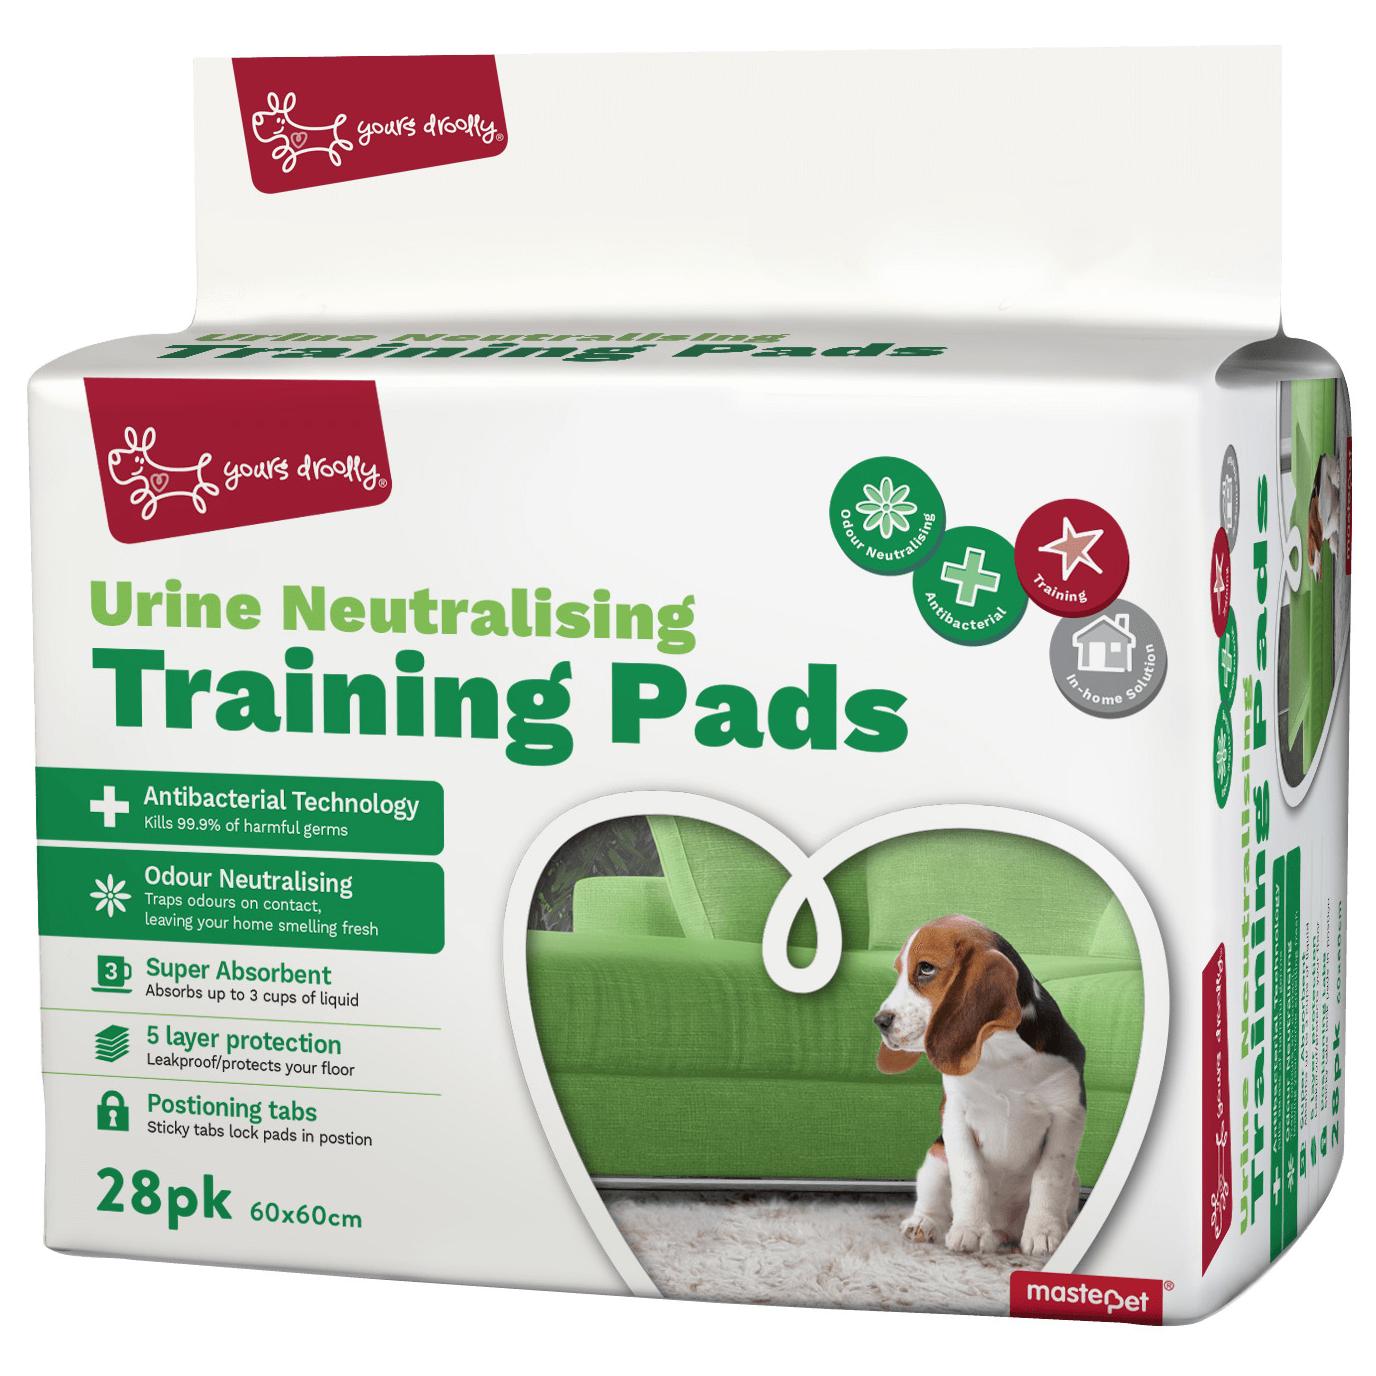 Yours Droolly Anti Bacterial and No Smell Toilet Training Pads 28pk